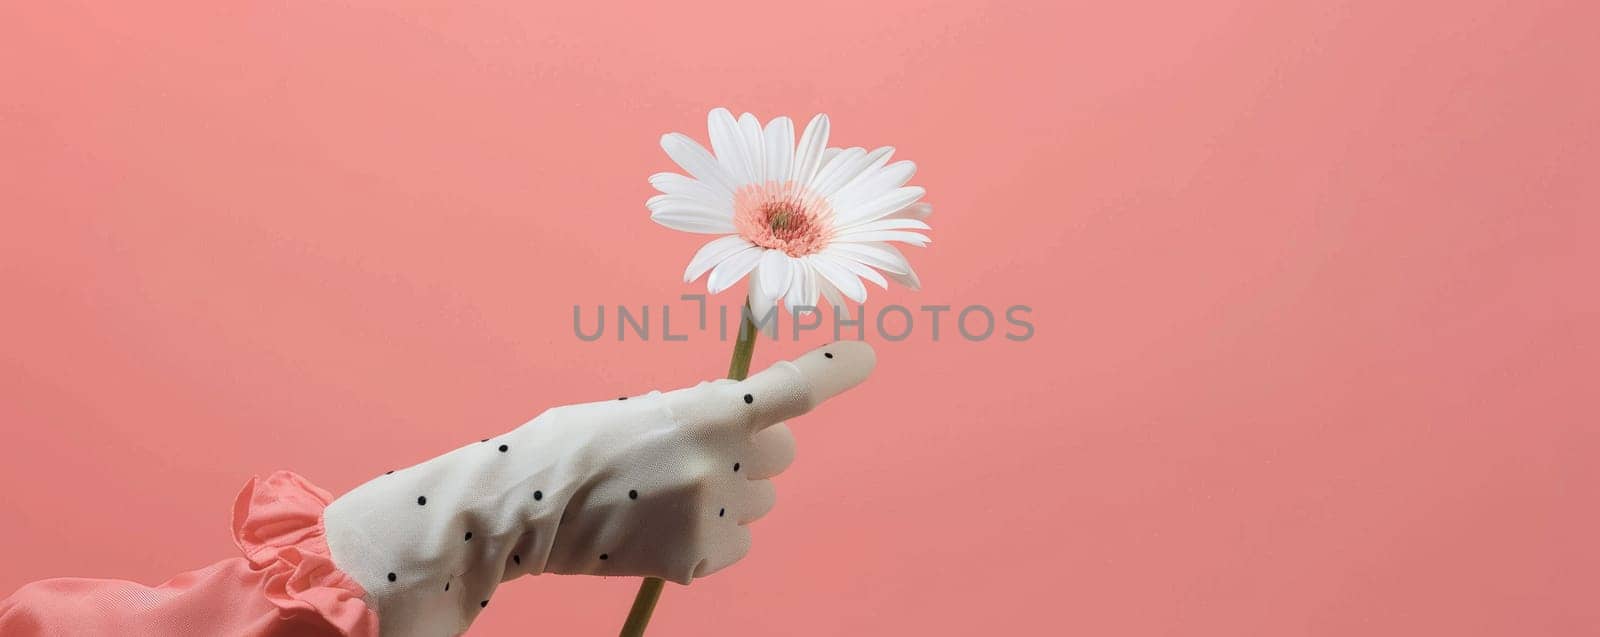 White polka dot glove holding a daisy flower against a pink background